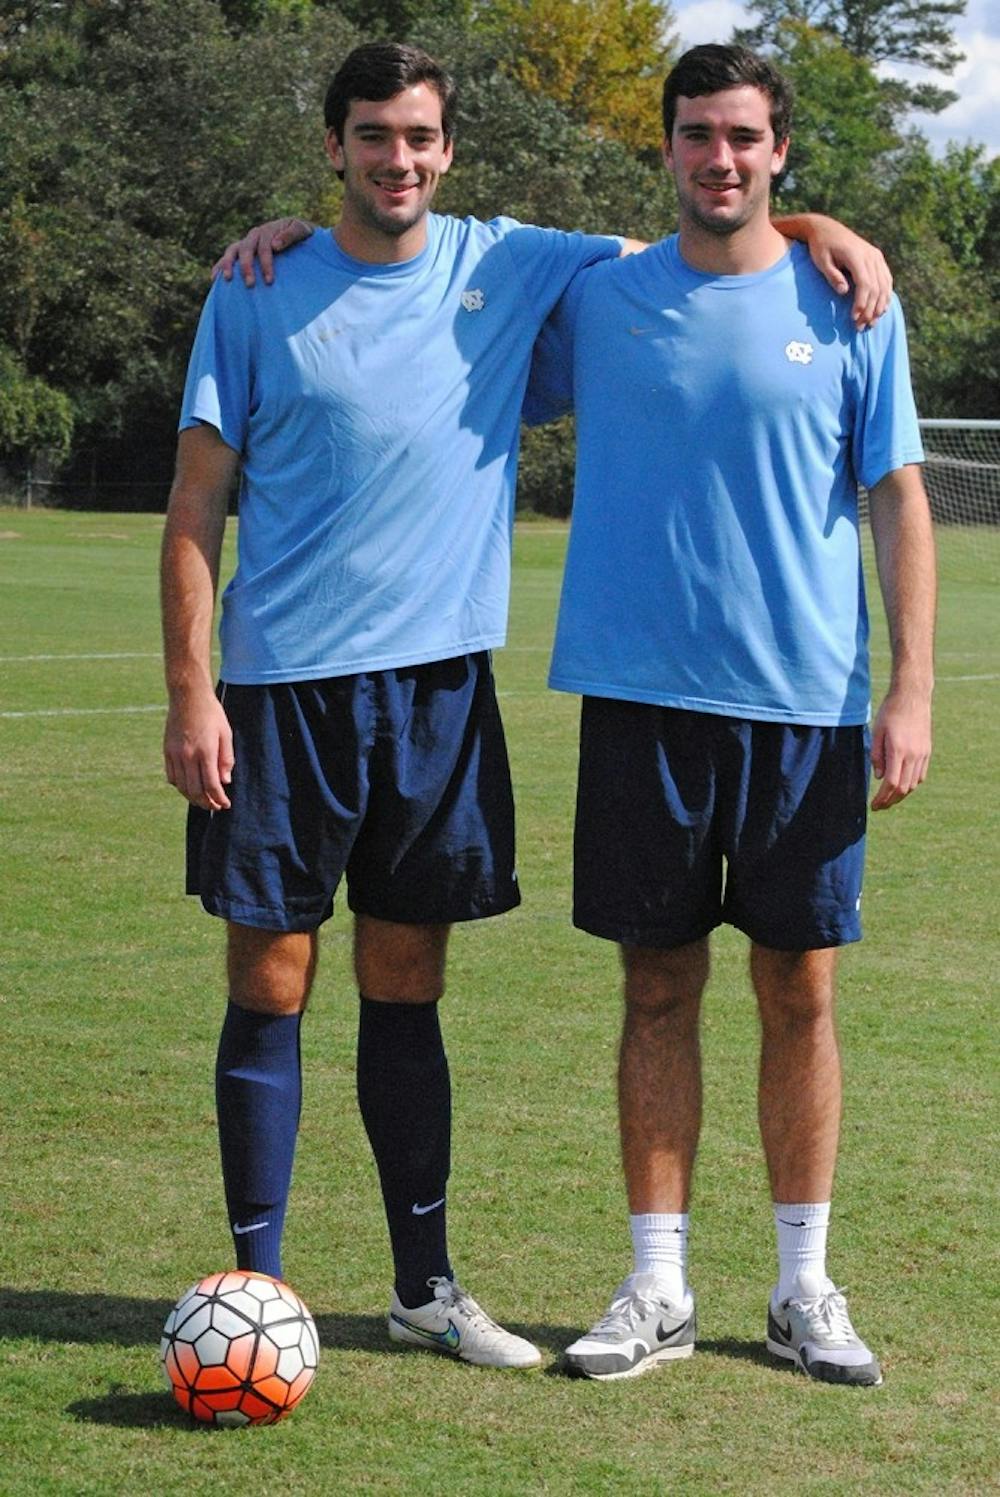 Identical twins Tucker (left) and Walker Hume have played soccer together since they were 4 years old.